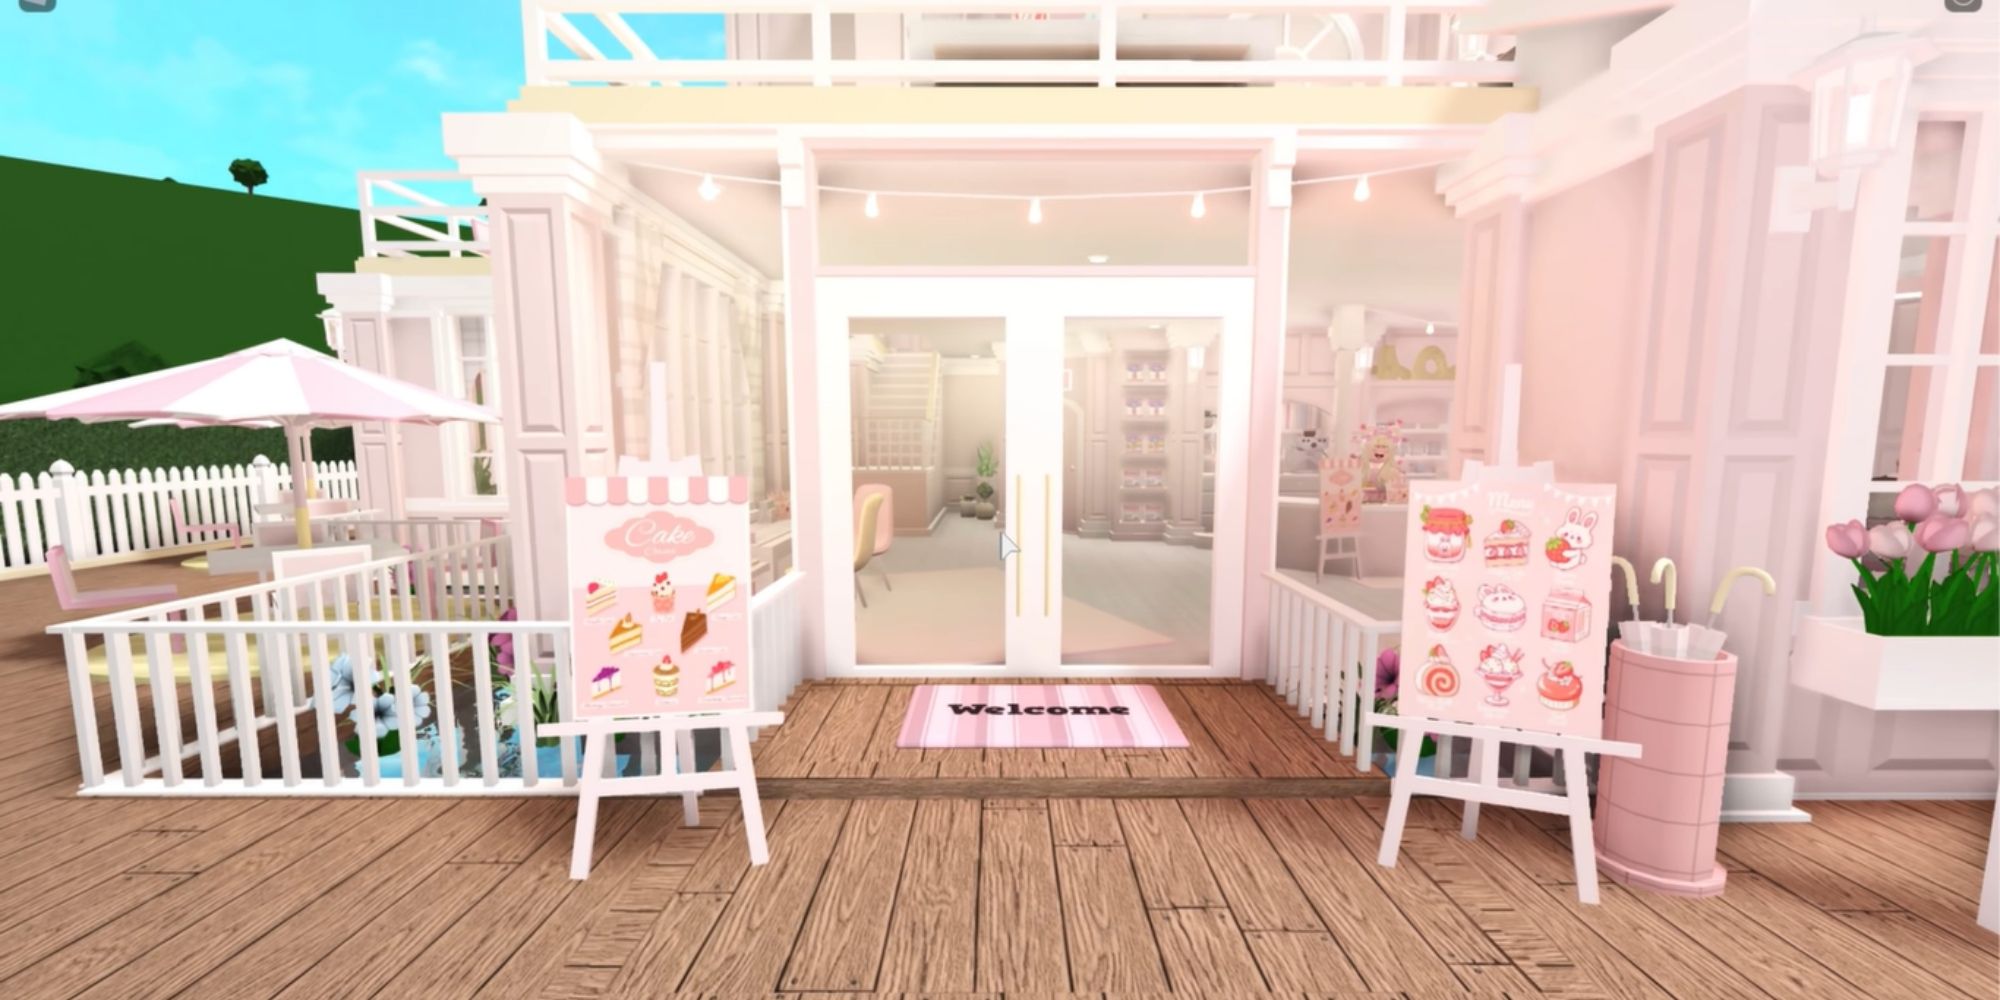 Tips And Tricks For Designing A Cafe In Roblox: Welcome To Bloxburg